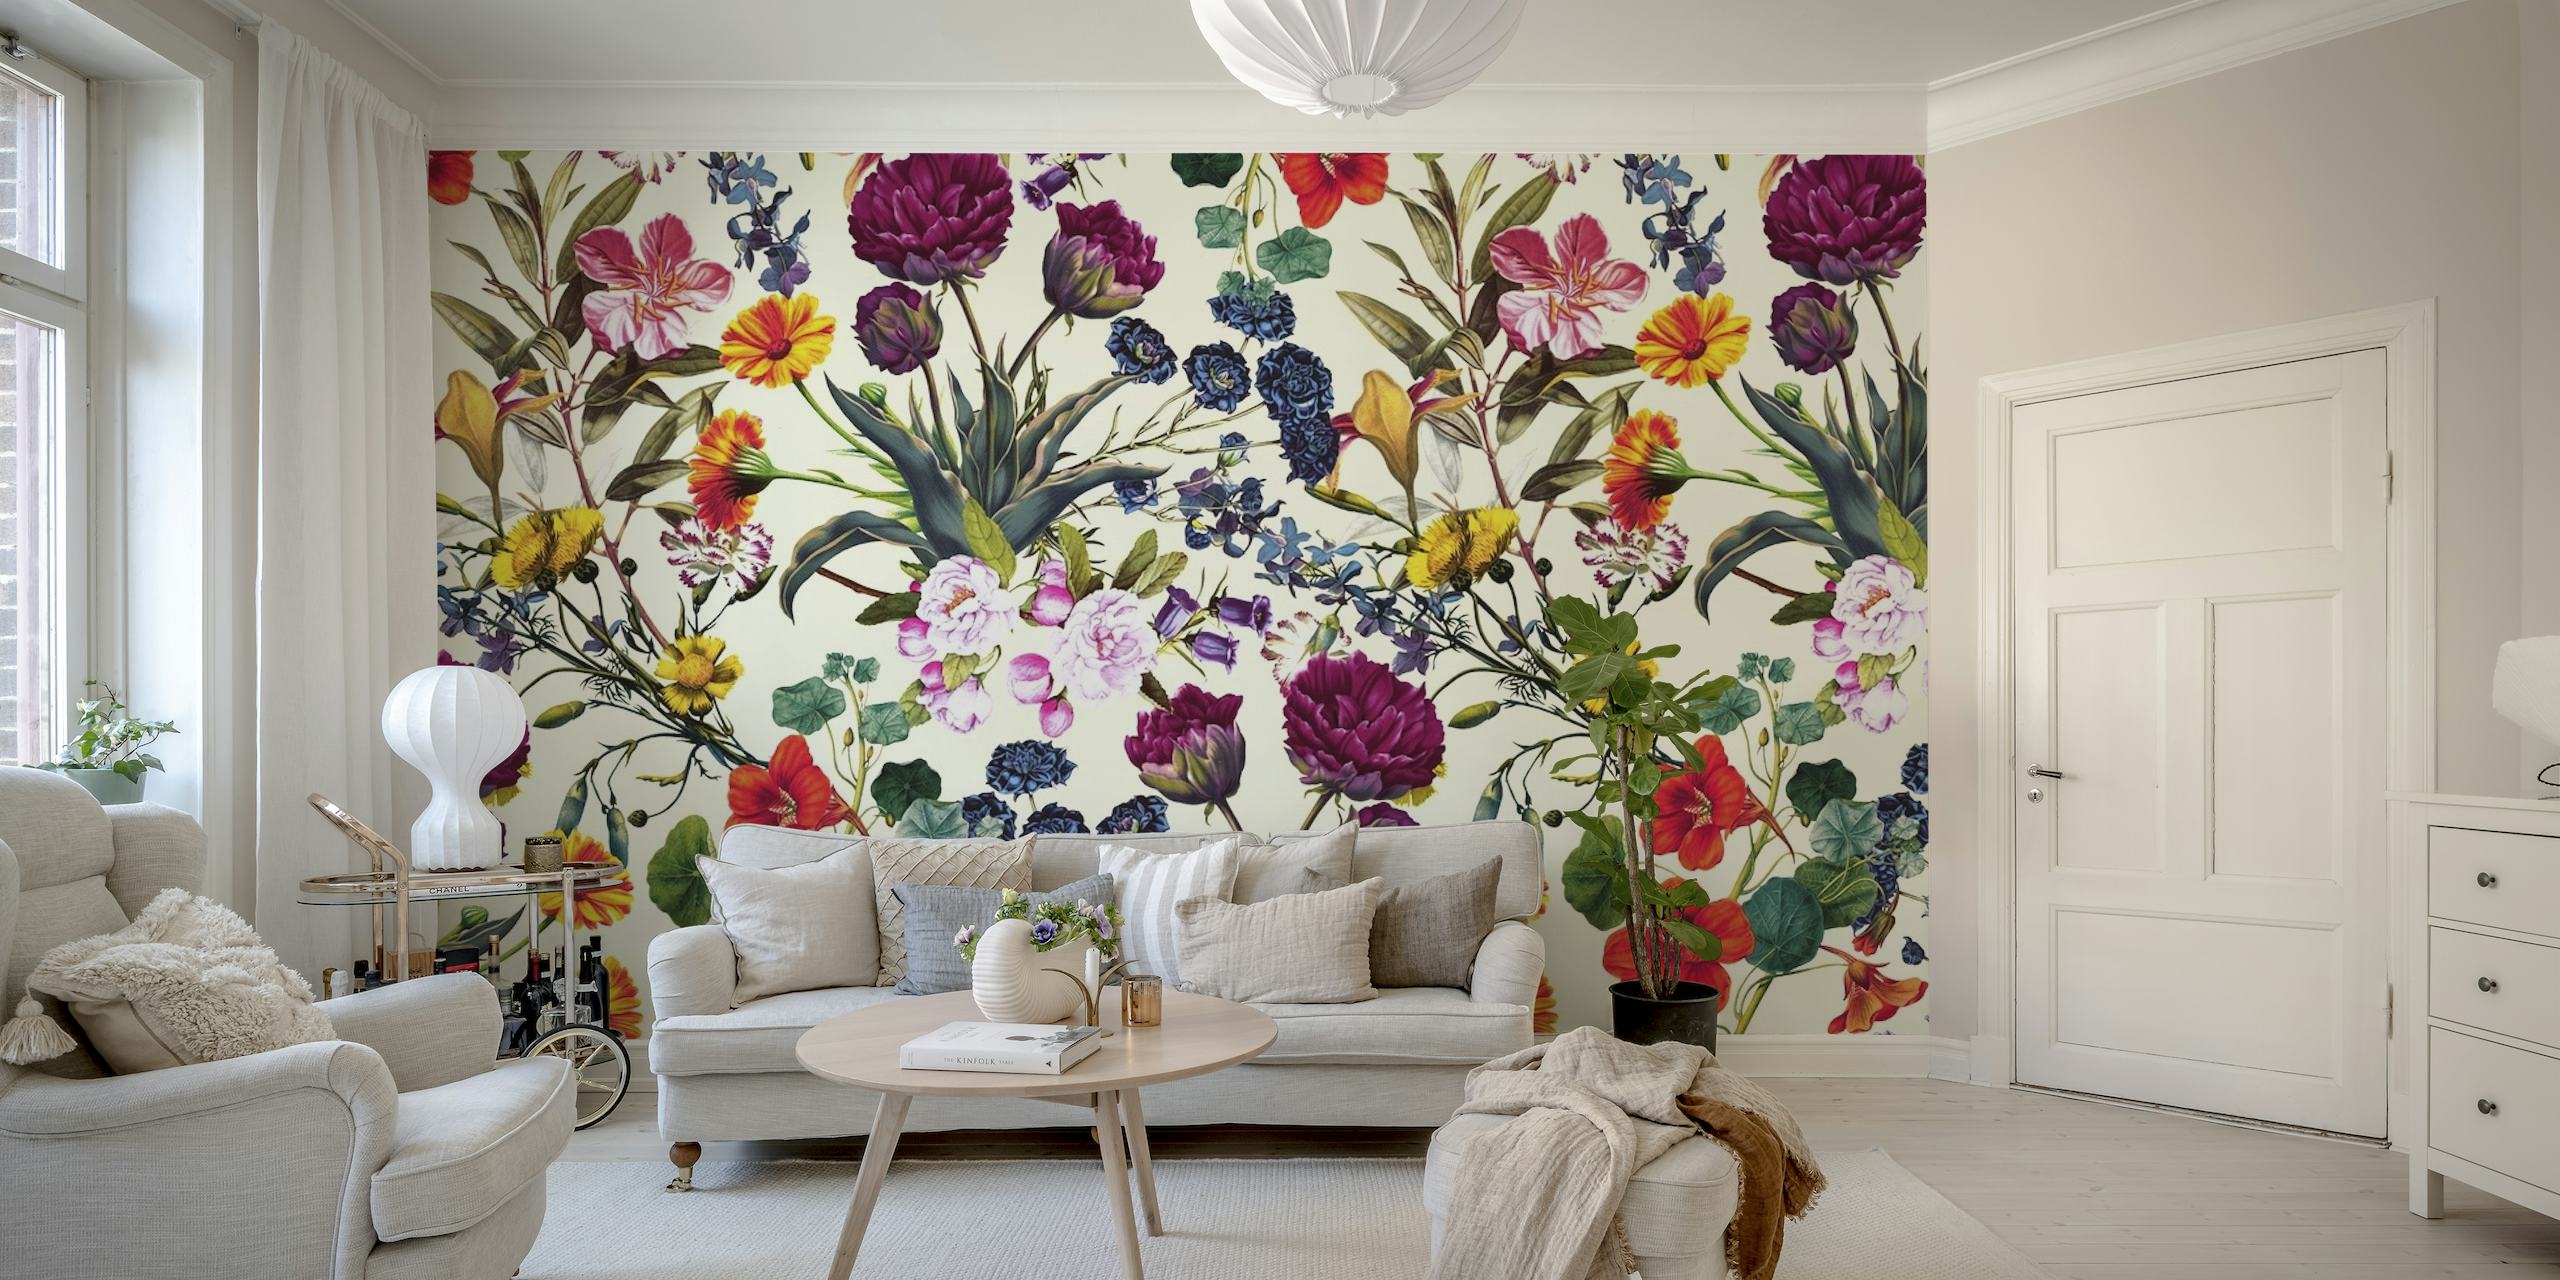 Colorful floral 'Magical Garden V' wall mural with various flowers on happywall.com